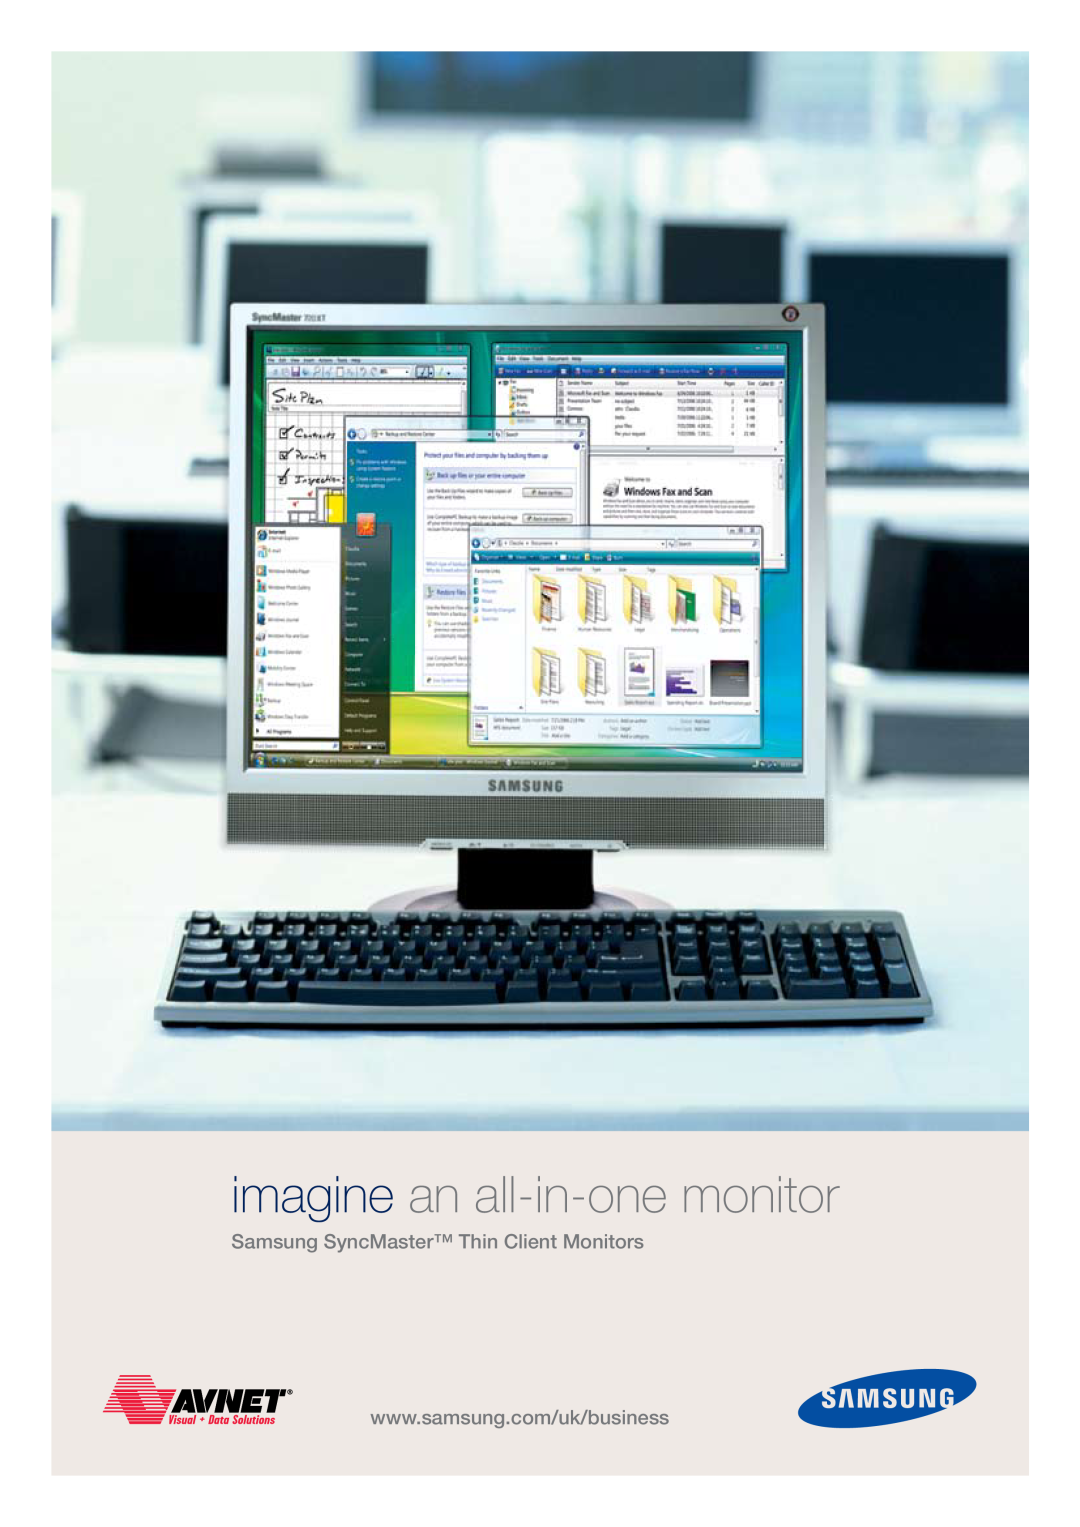 Samsung SM710NT manual Samsung SyncMaster Thin Client Monitors, imagine an all-in-one monitor 